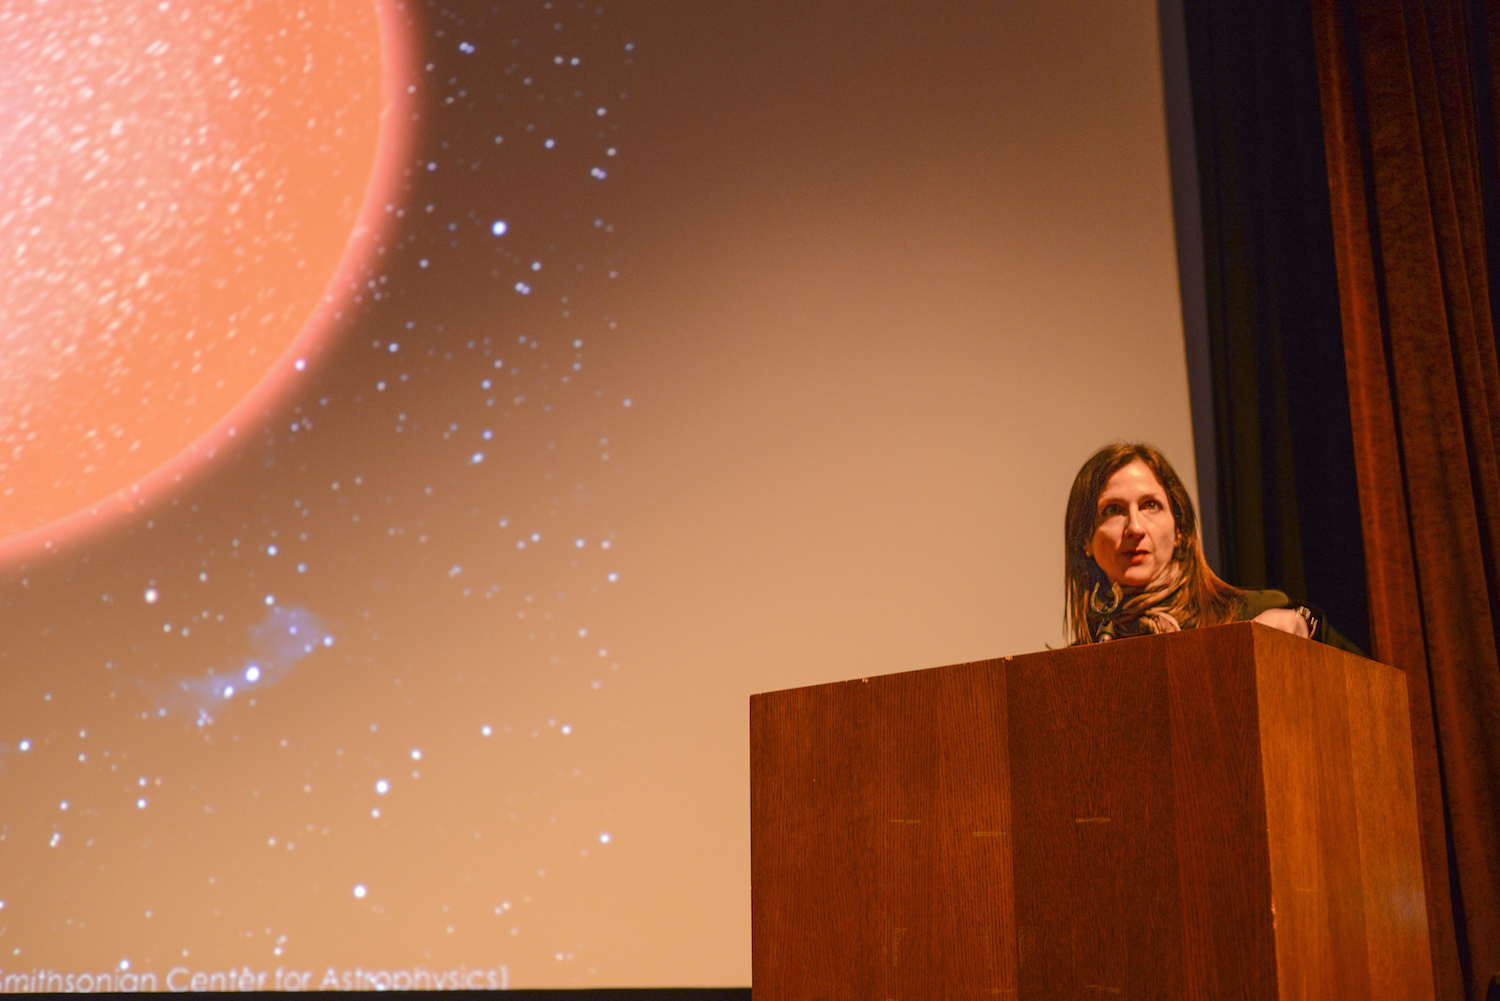 Seager is a pioneer in the field of exoplanets, specifically in characterizing the atmospheres and searching for life on those distant worlds. Her talk addressed the age-old question: "Are we alone?"